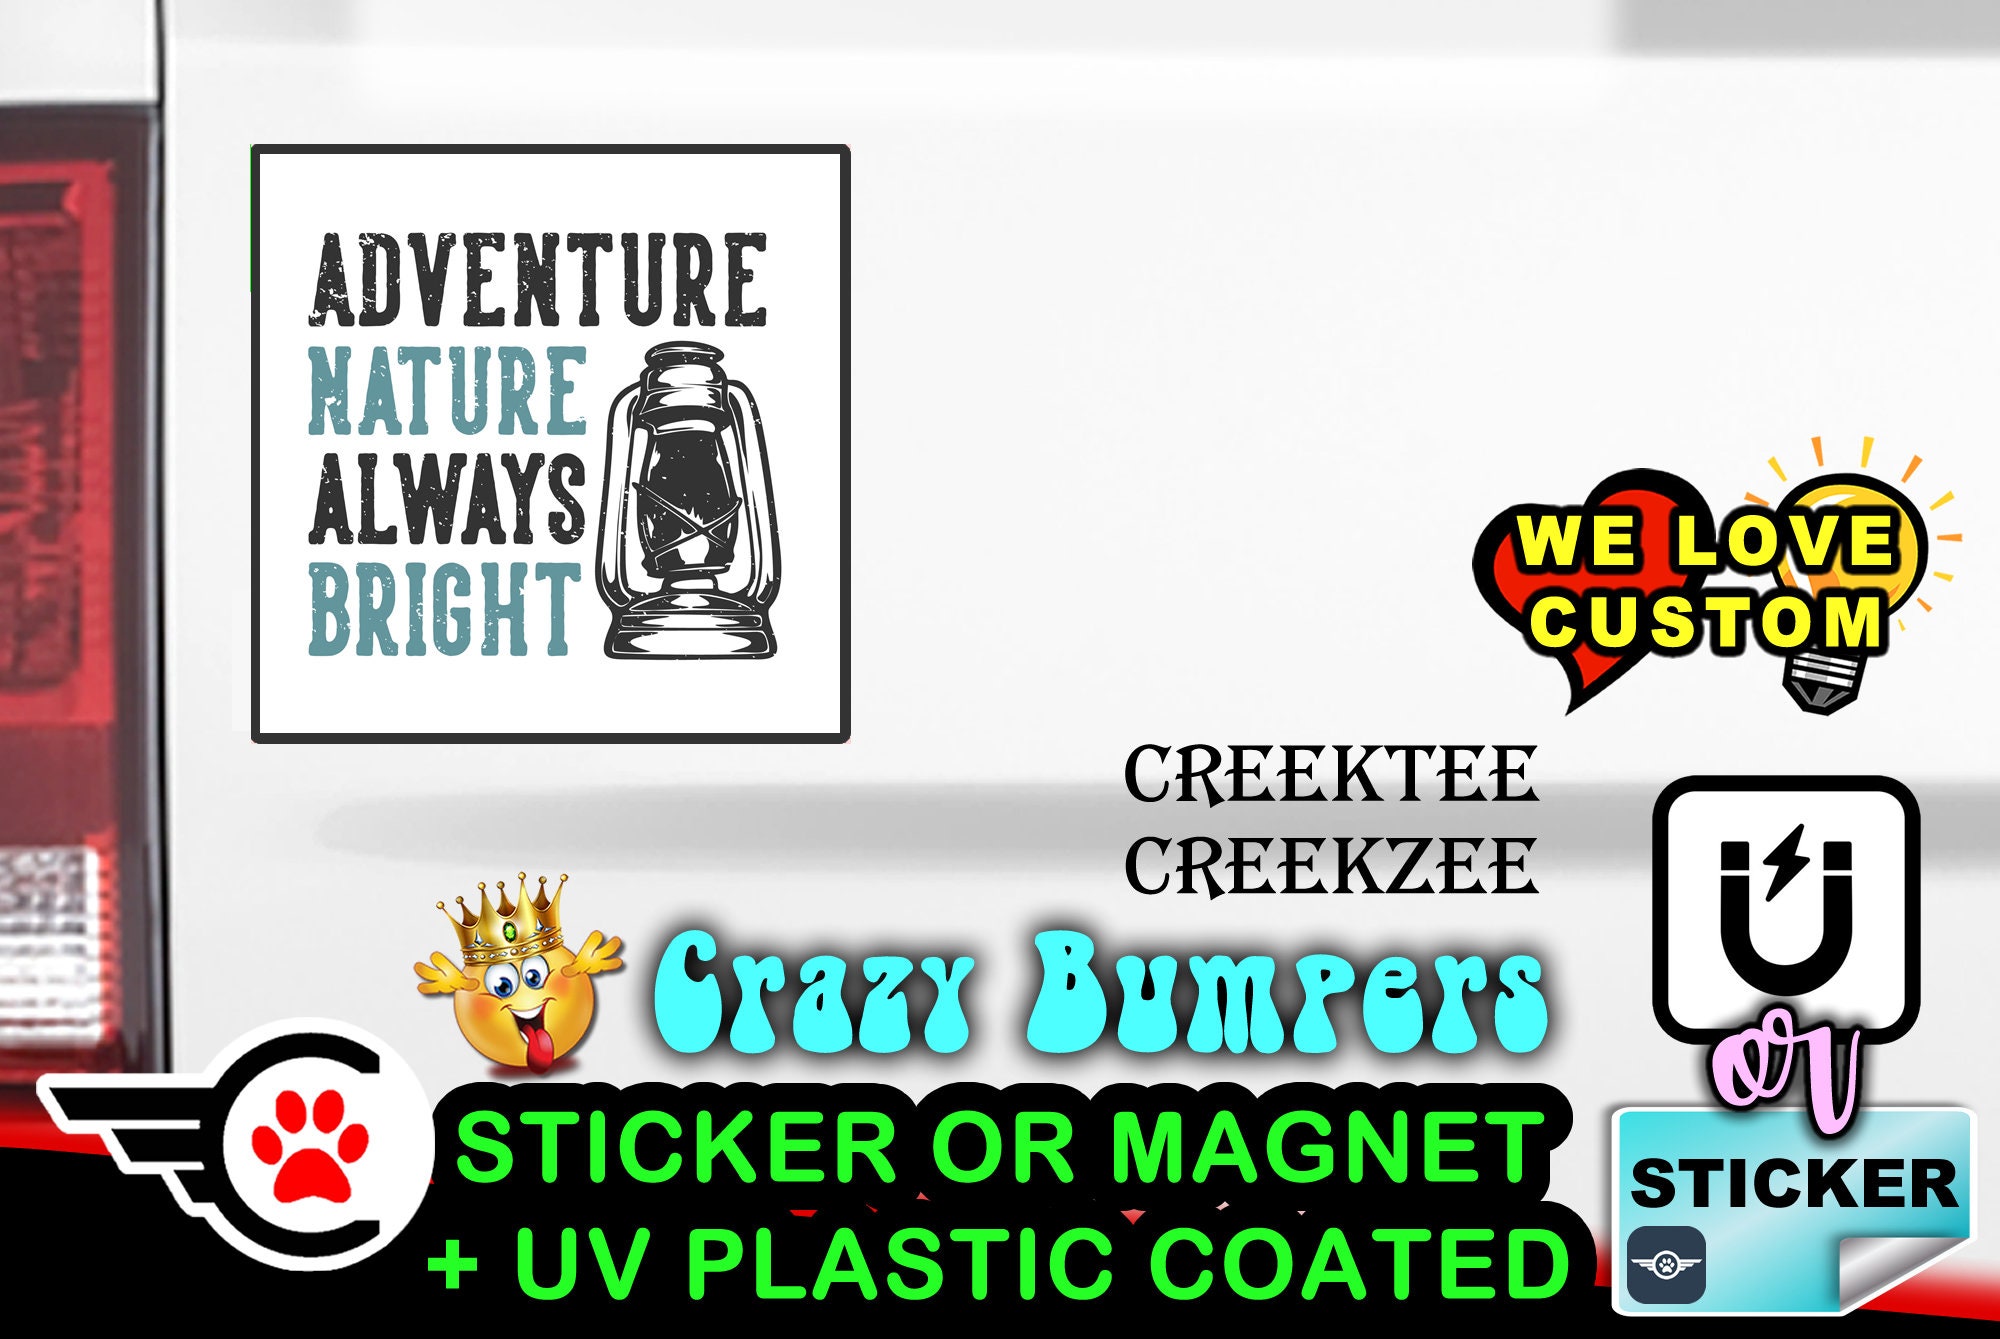 Adventure Nature Always Bright Bumper Sticker or Magnet in various sizes Hiqh Quality UV Laminate Coating 2